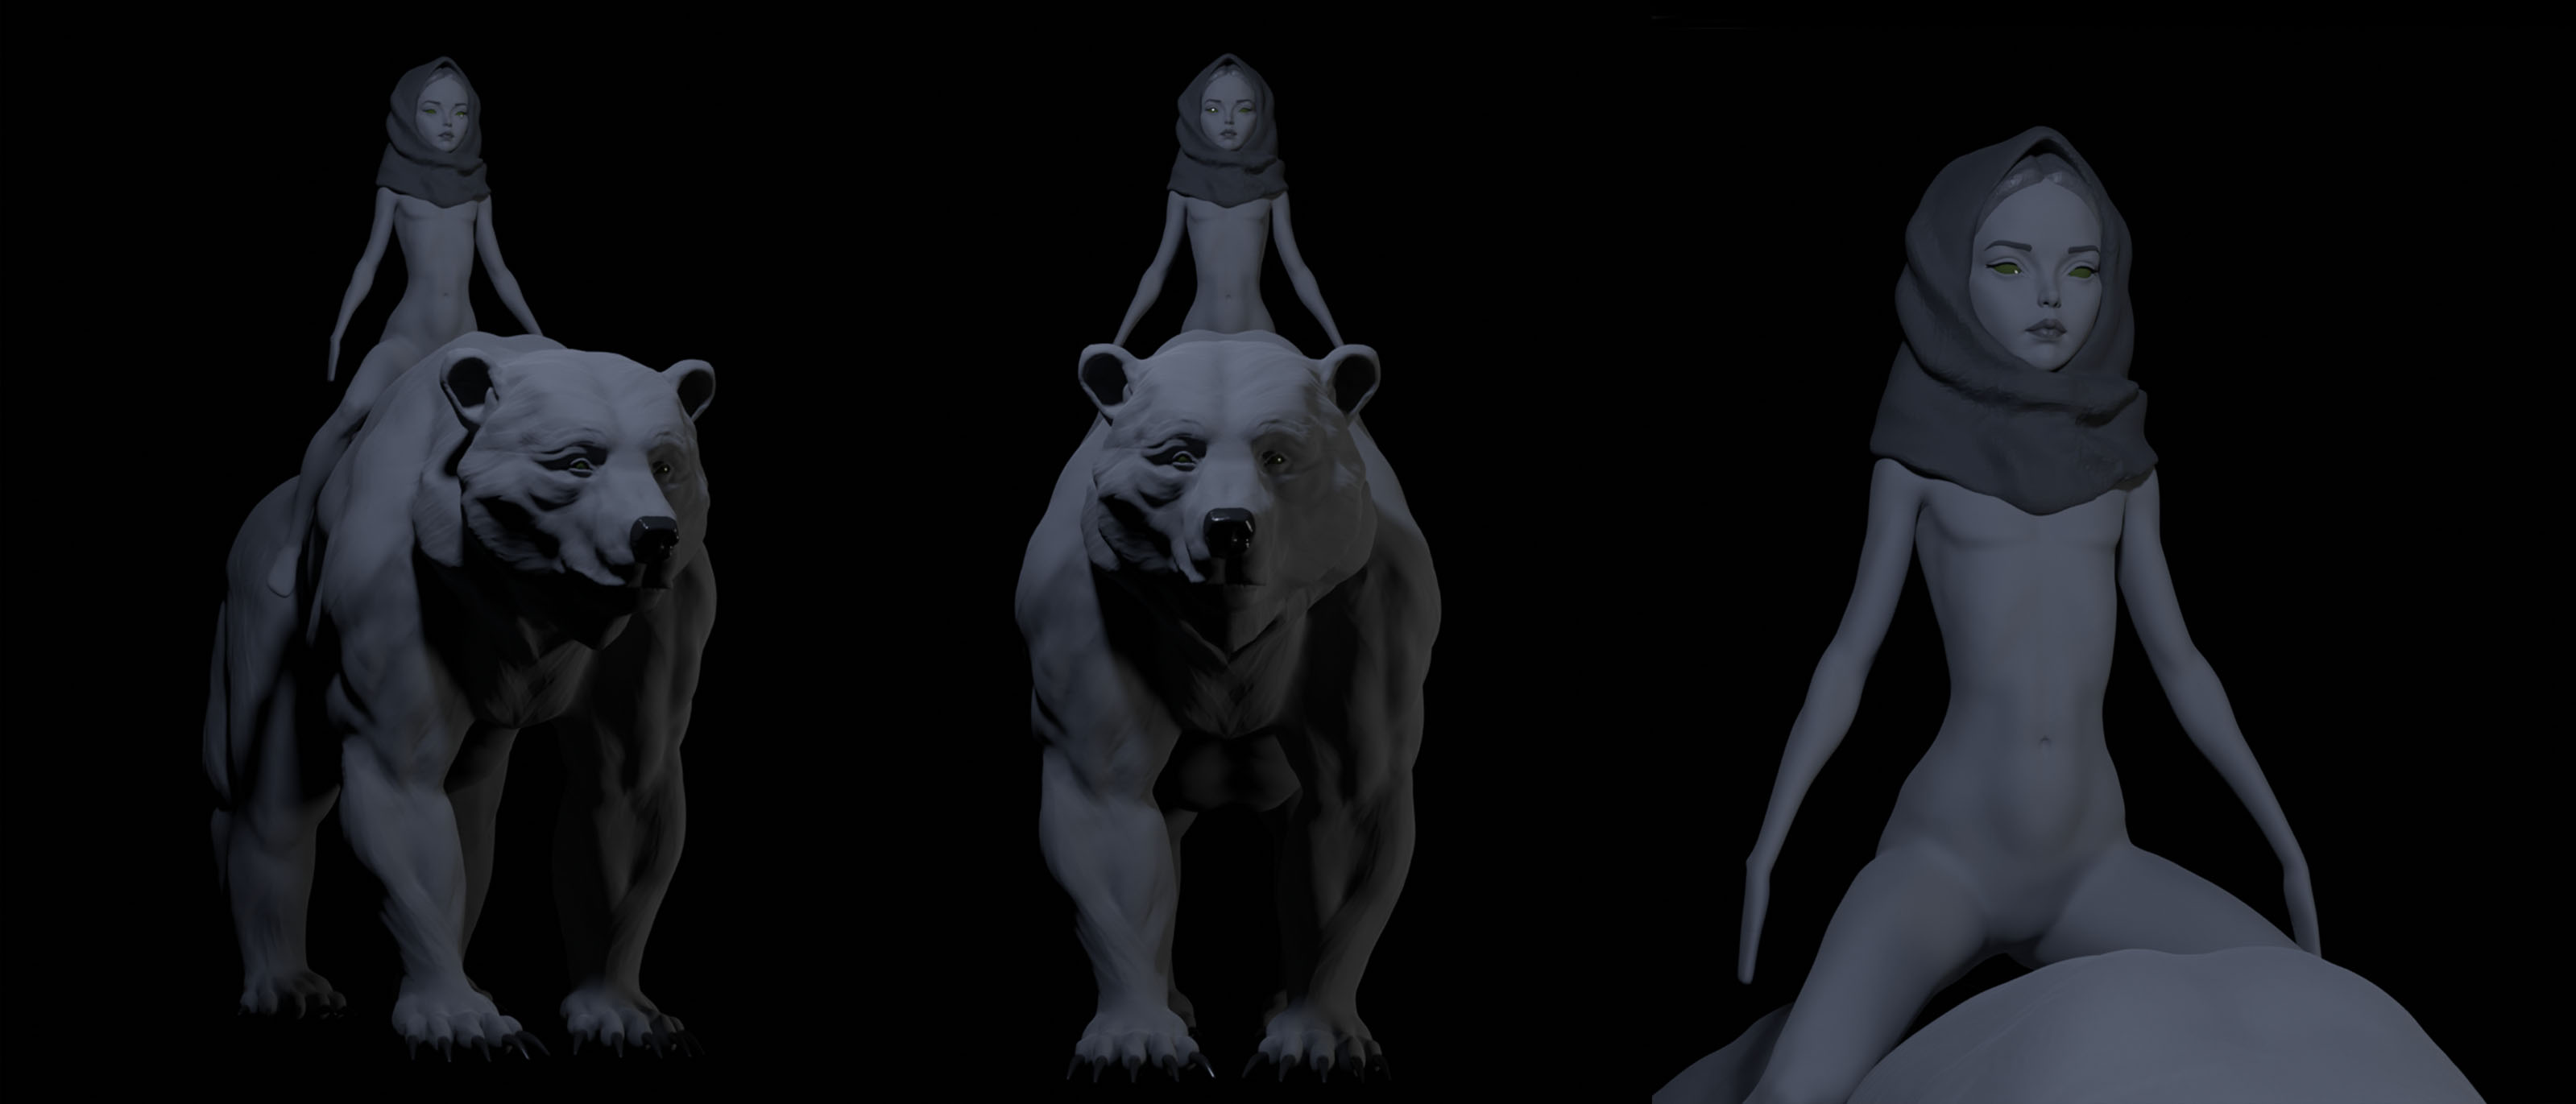 Mama Bear - Finished Projects - Blender Artists Community